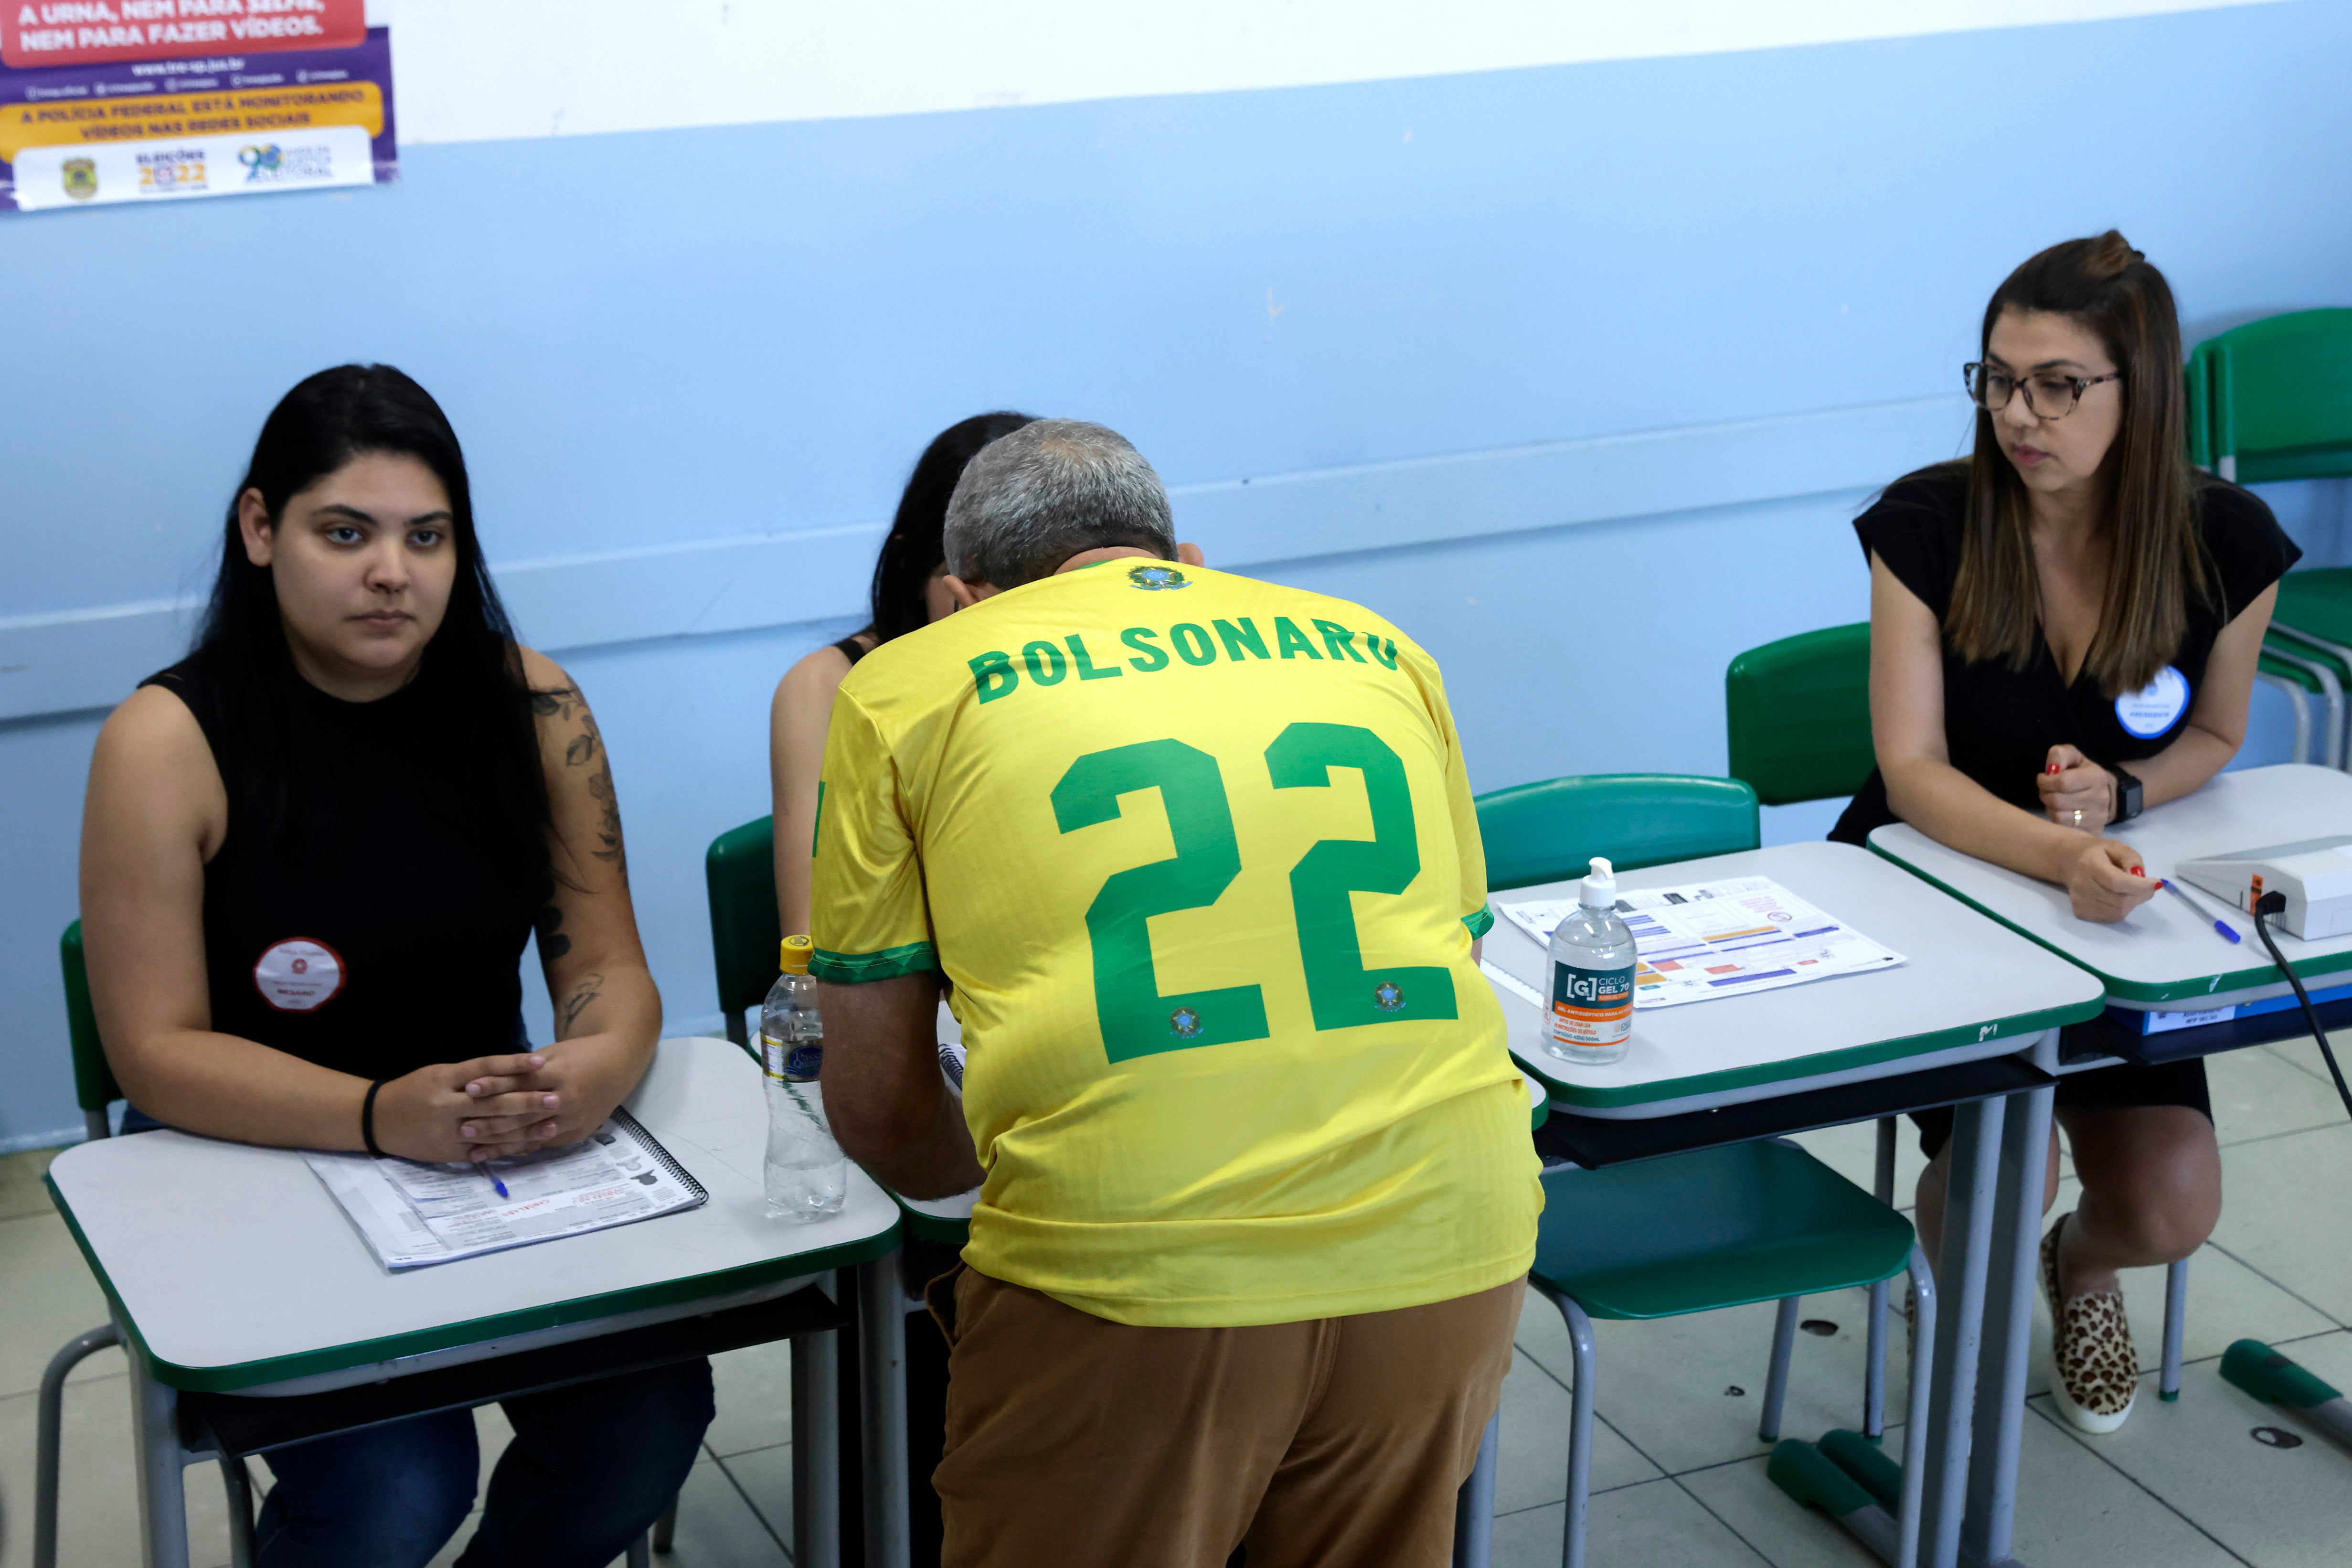 The team’s famous ‘O Canarinho’ shirt, worn by Bolsonaro and his supporters, has now become a political symbol